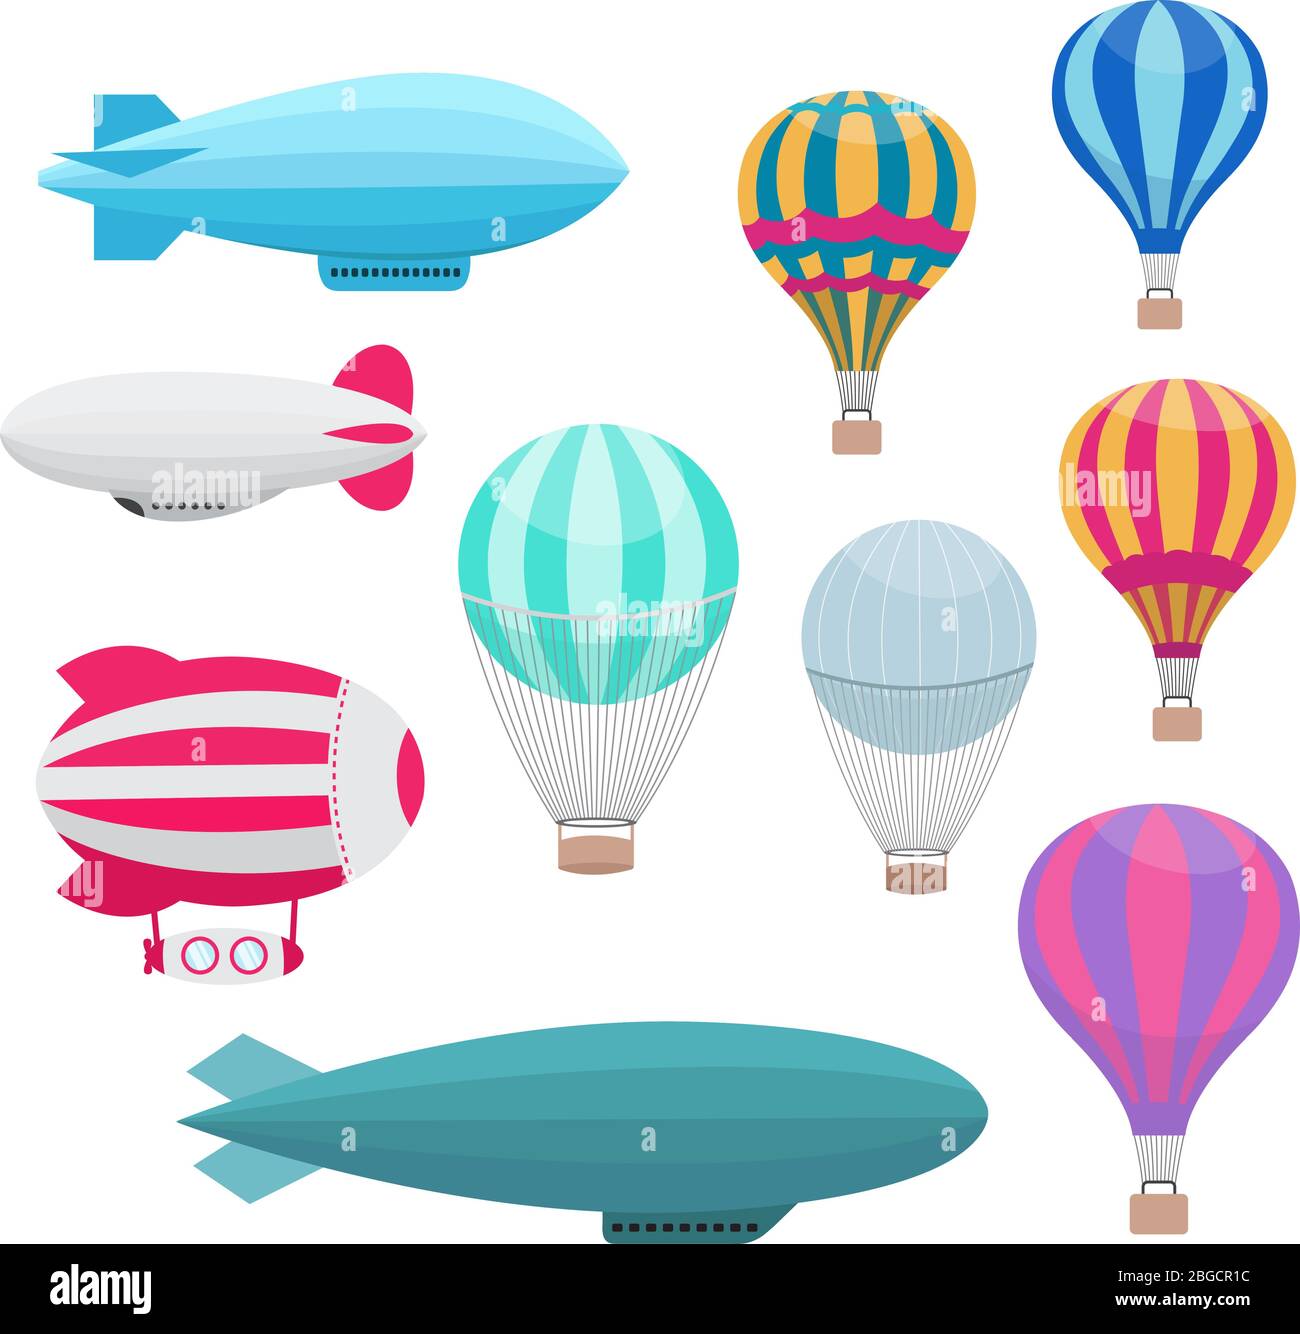 Cartoon hot air balloons vector set. Colored air balloon with basket for travel and transportation flight Stock Vector